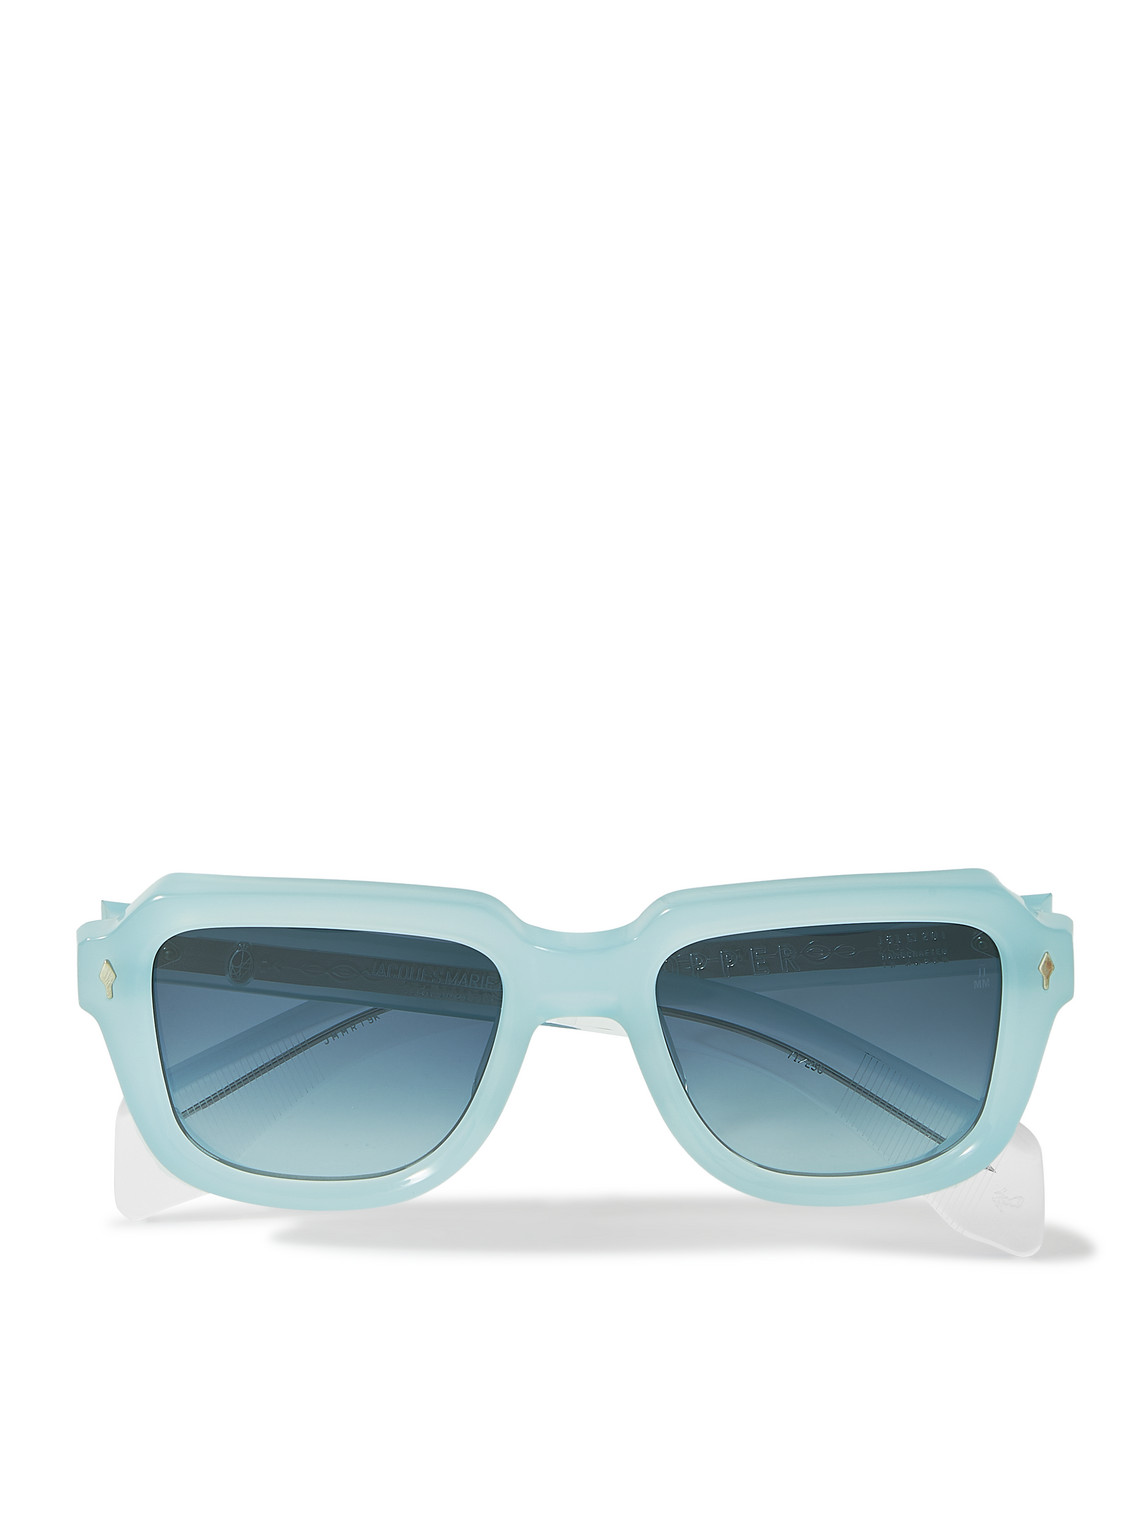 Jacques Marie Mage Taos Square-frame Acetate Sunglasses In Blue